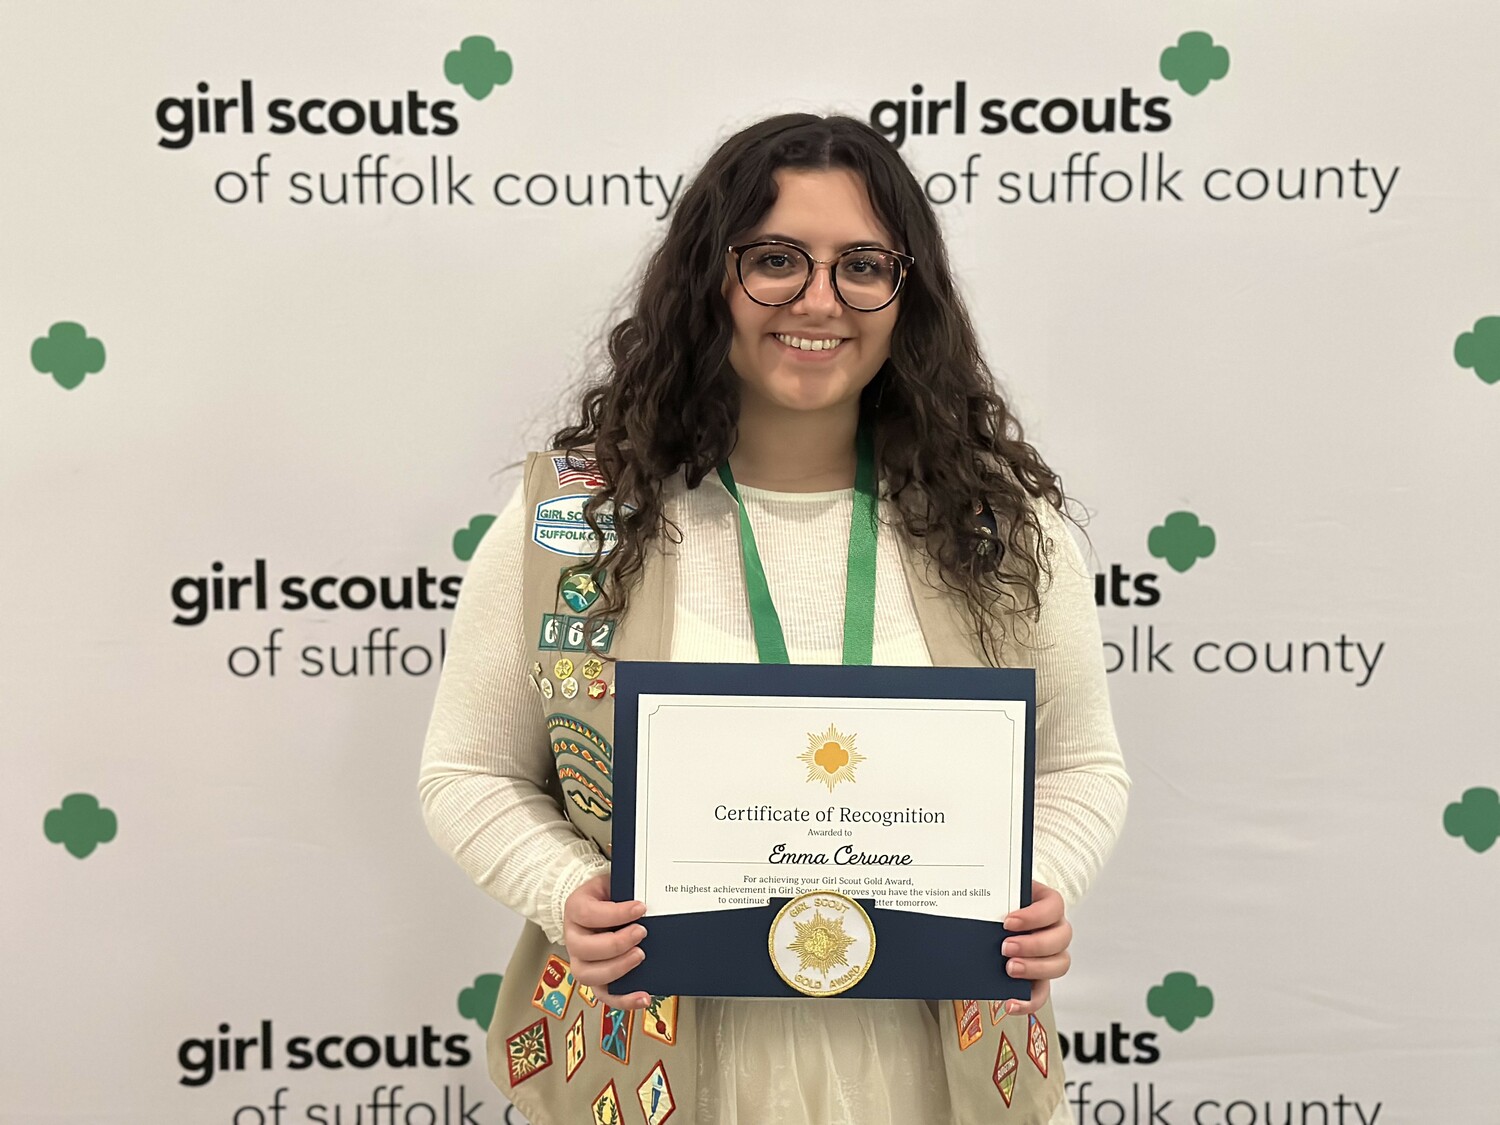 Emma Cervone receiving her Gold Award from the Girl Scouts of Suffolk County.